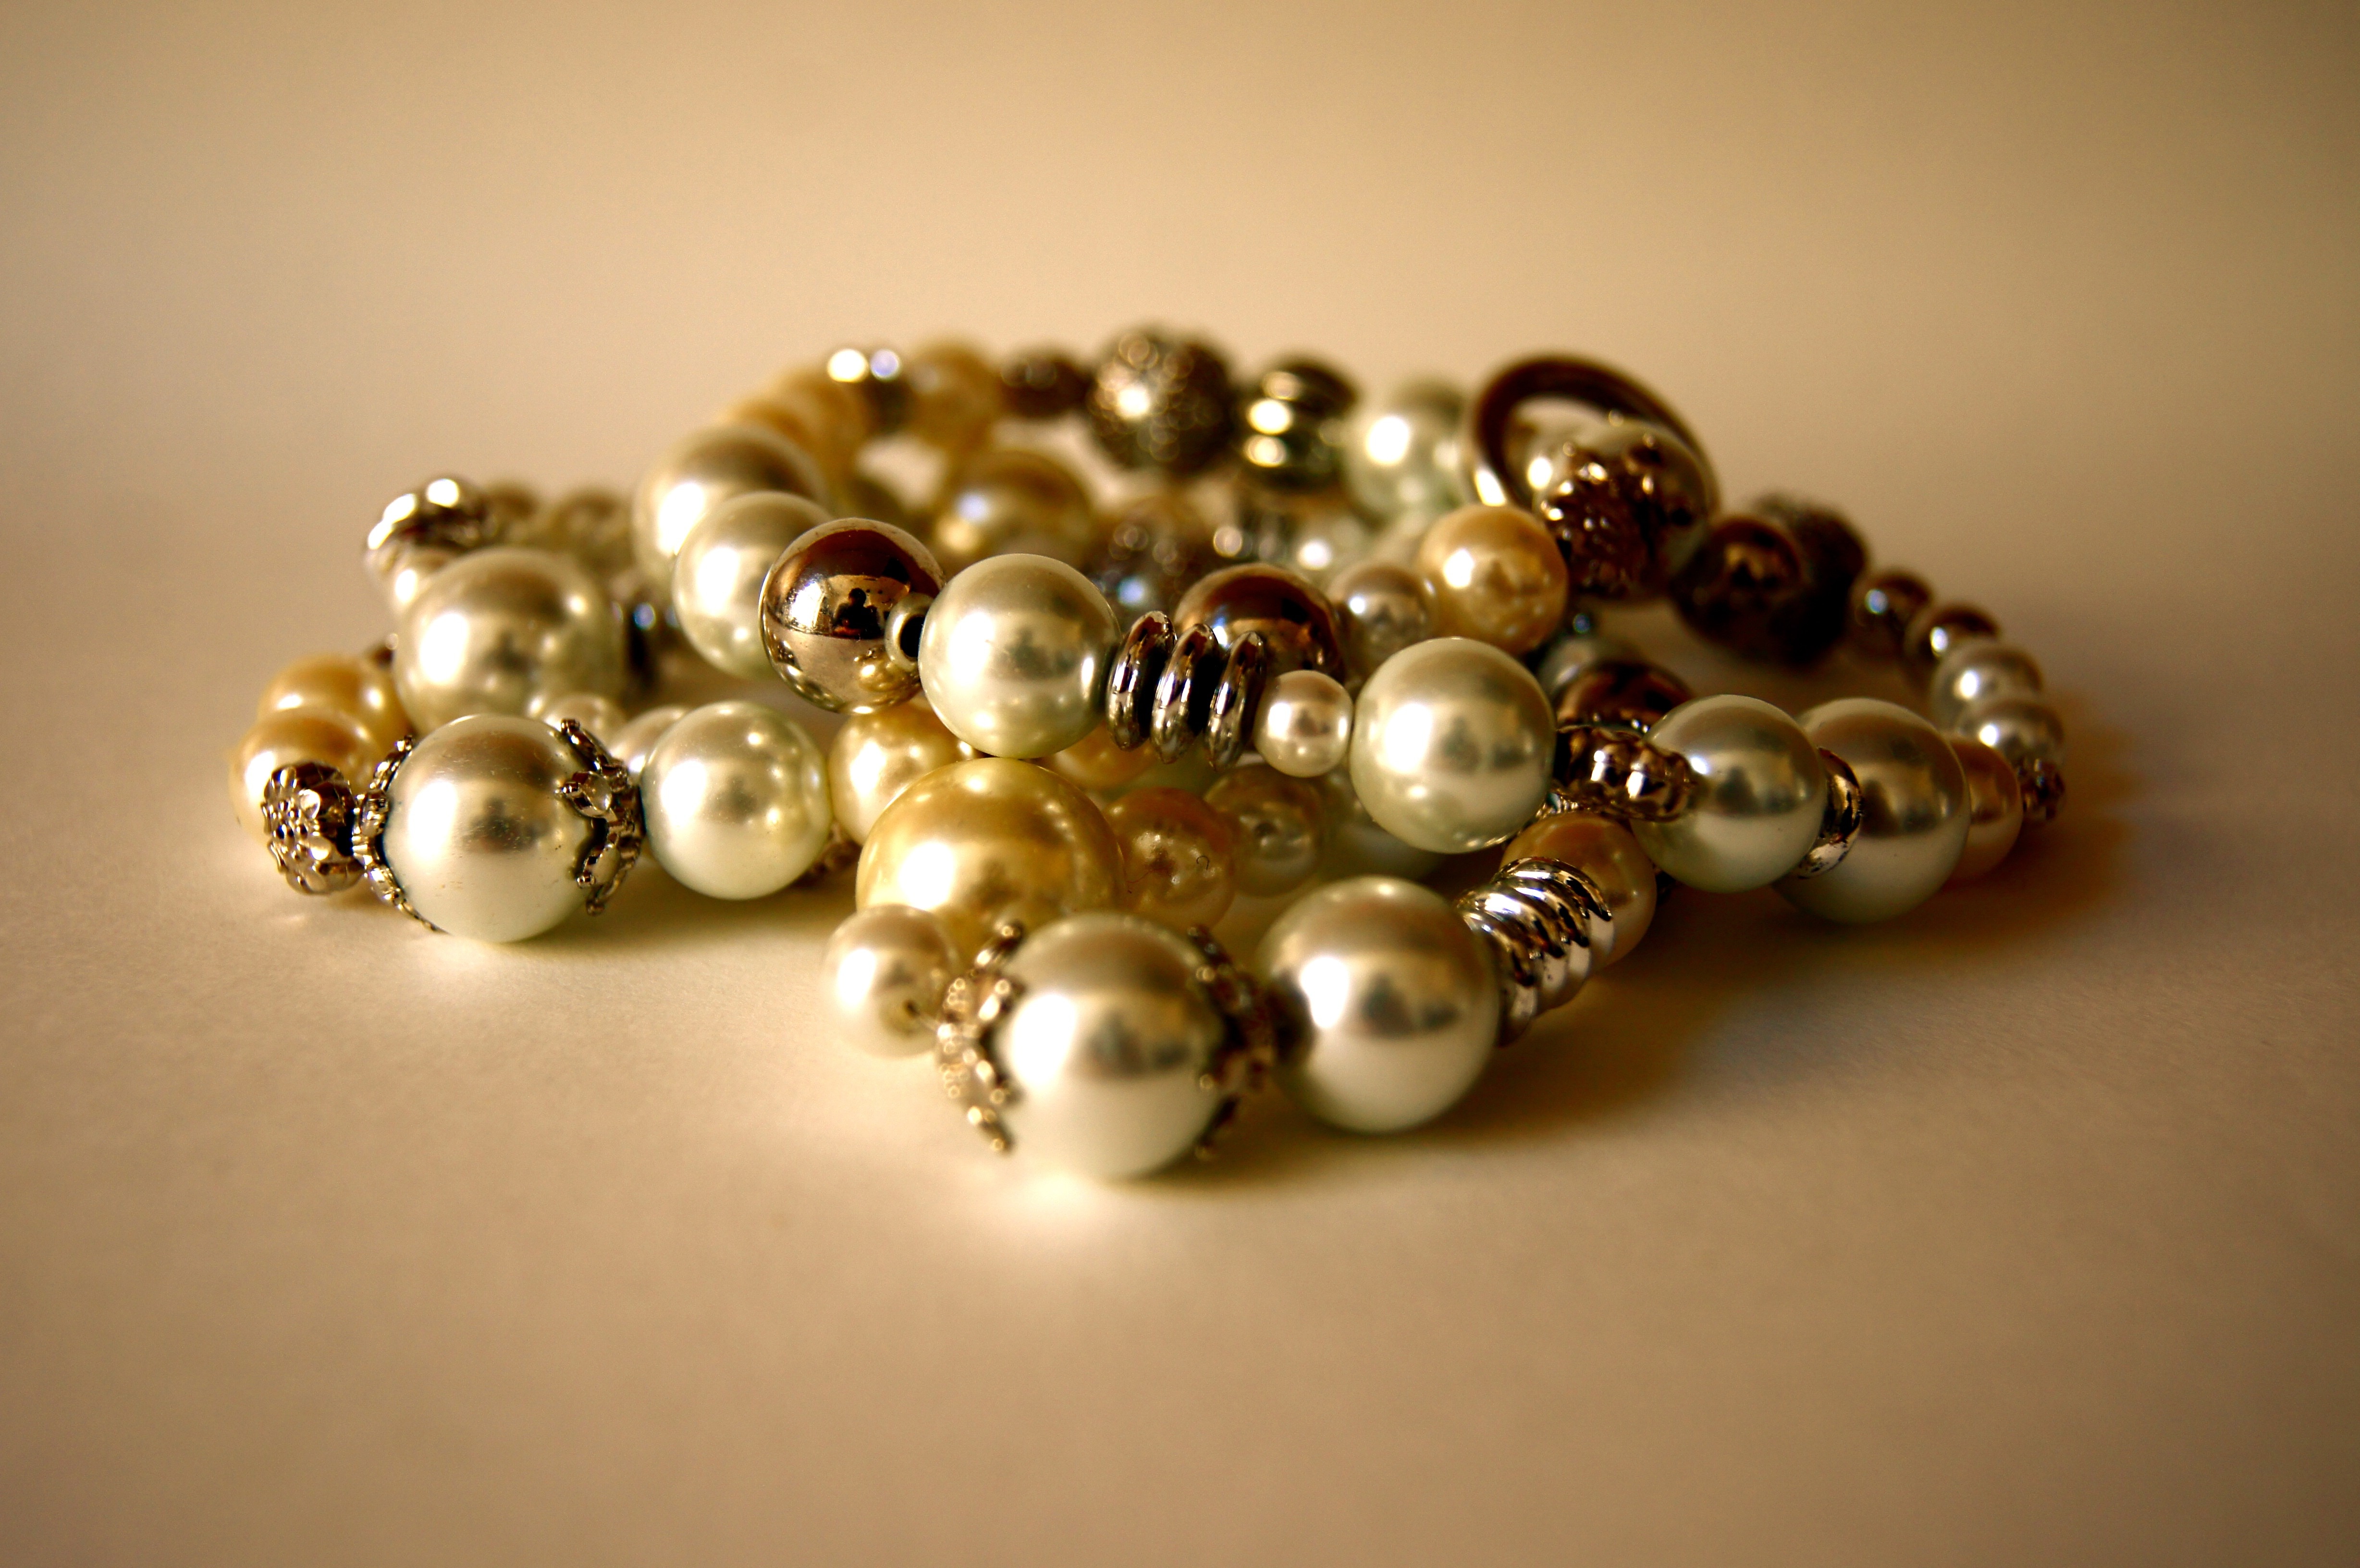 gold and silver pearl bracelets on beige surface